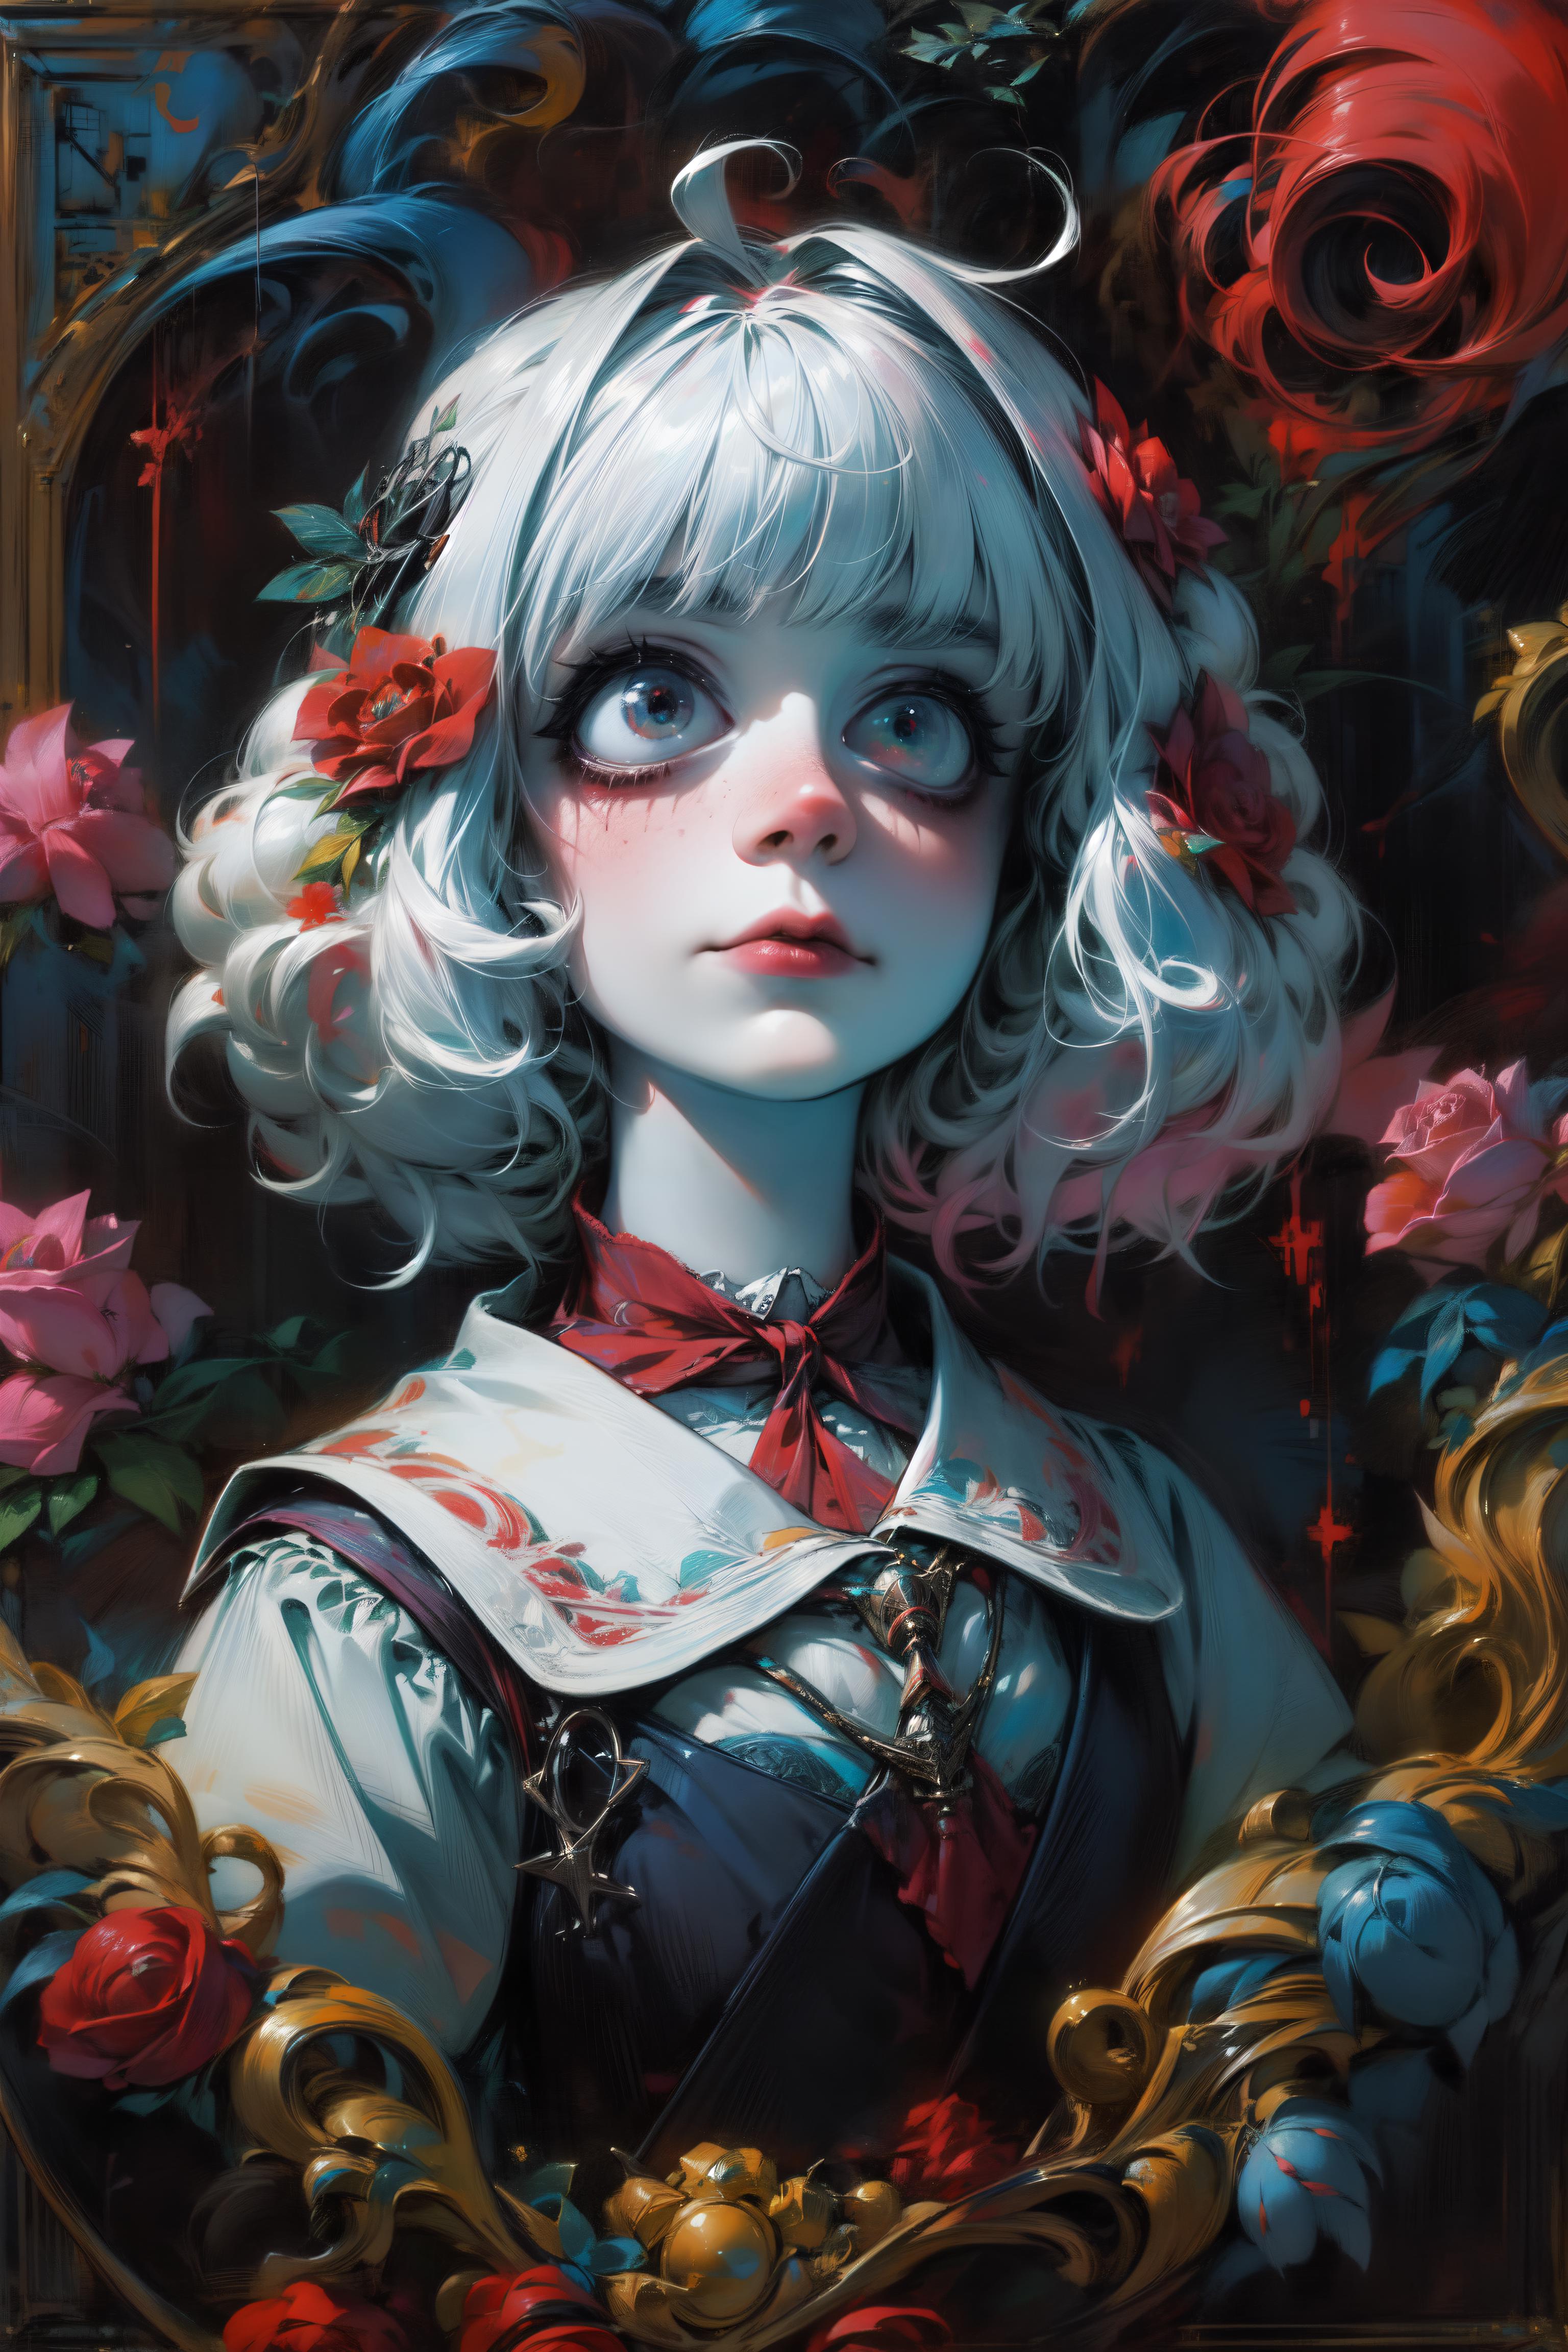 A girl with white hair, red bow, and blue eyes, surrounded by flowers.